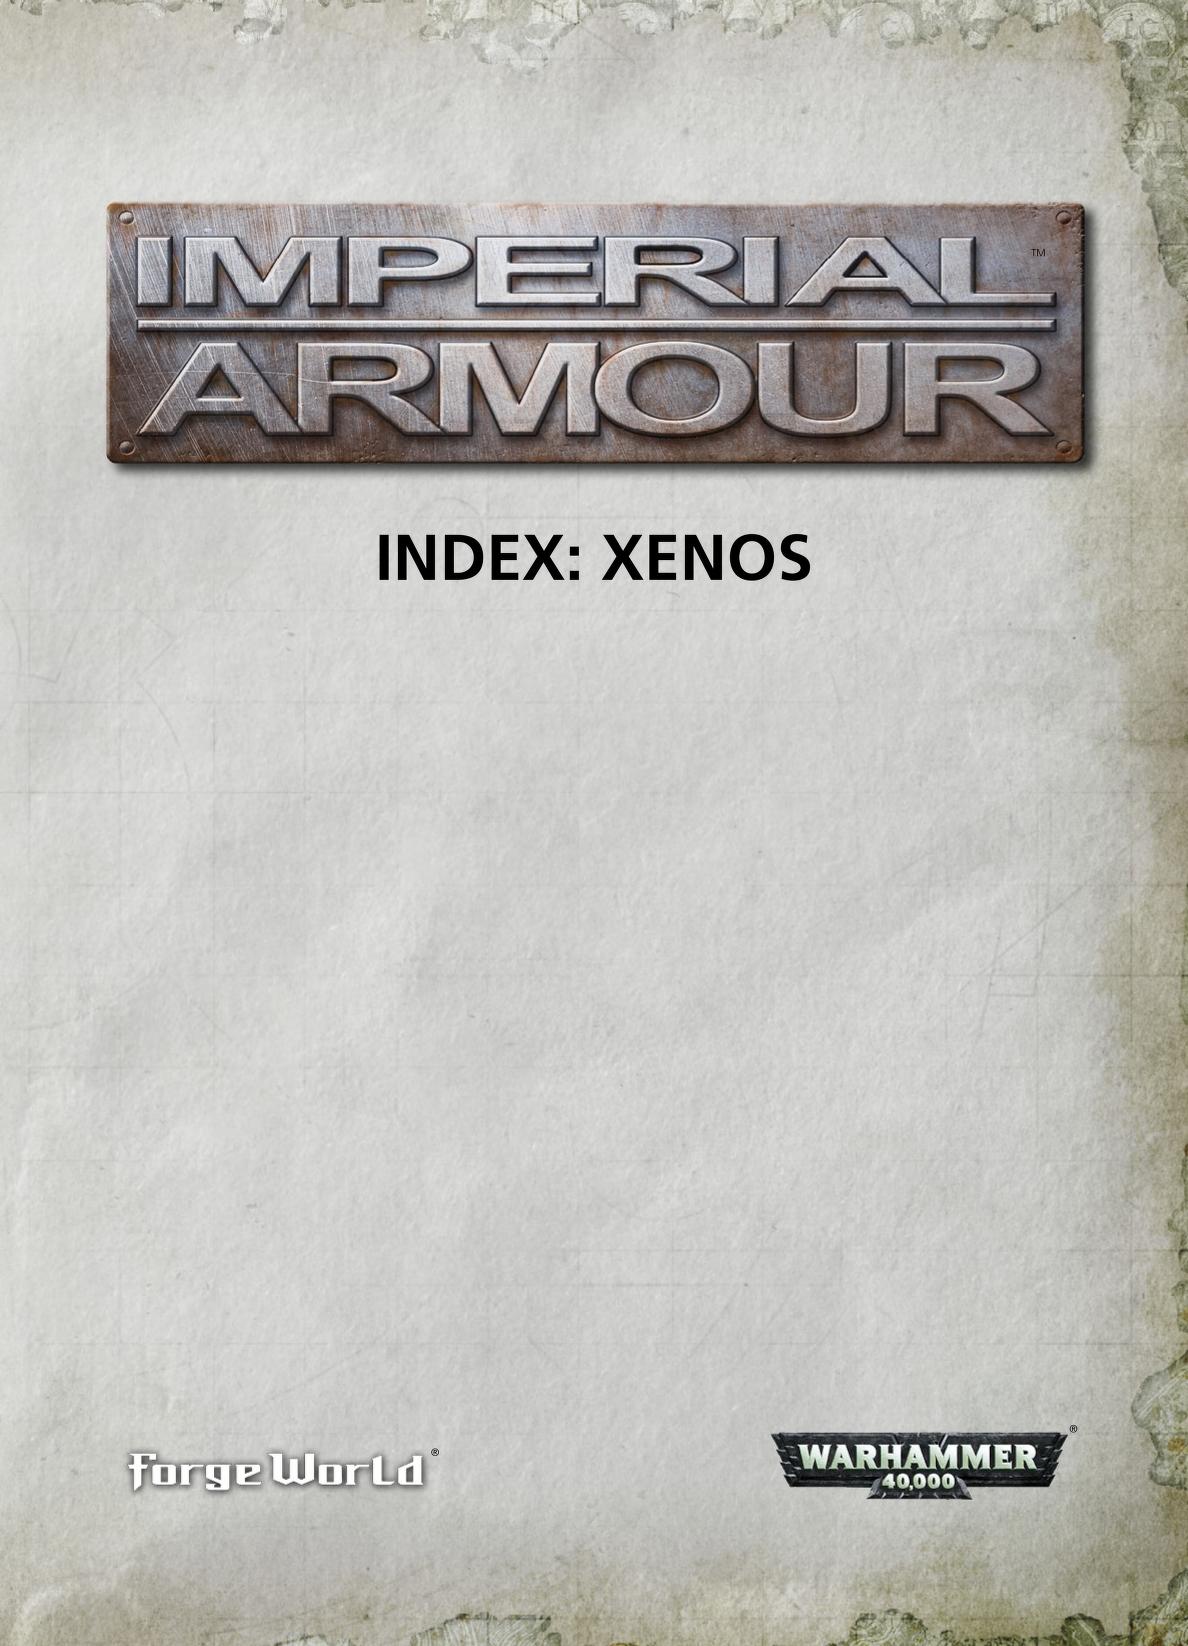 Imperial armour index xenos pdf download open url app download free